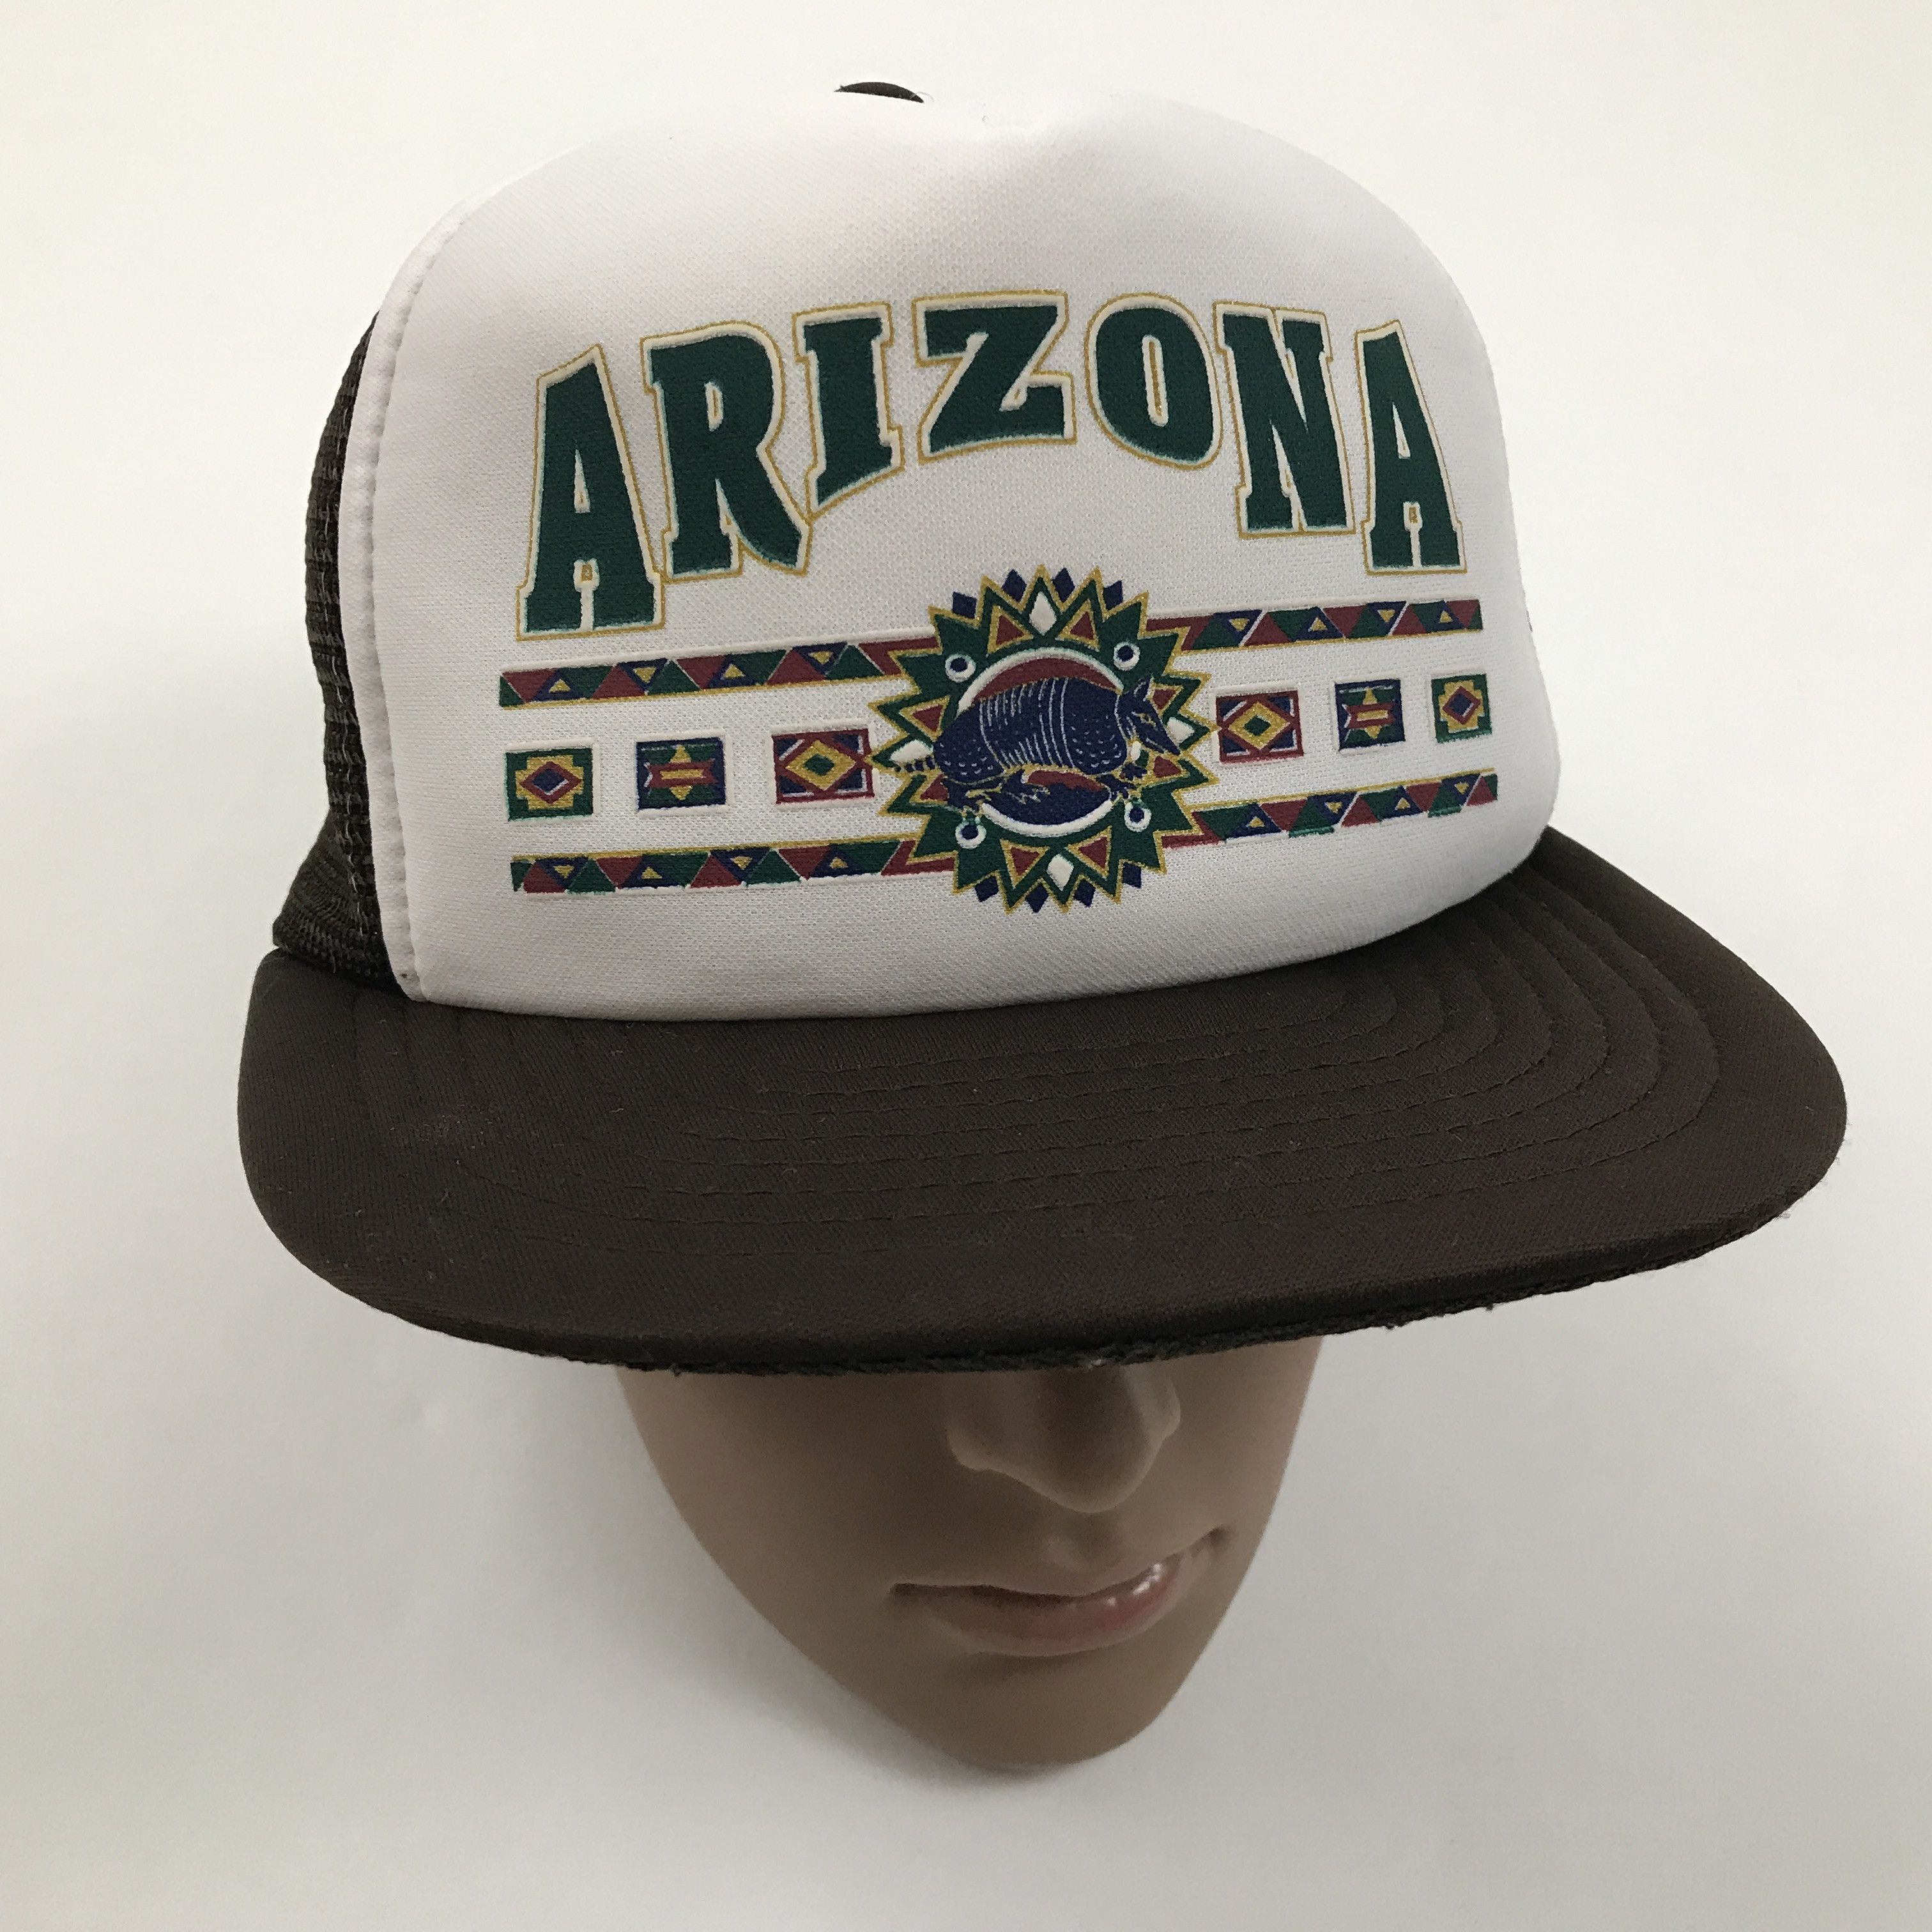 Vintage VINTAGE Arizona Trucker Hat 80's Snapback FOAM Front South Size ONE SIZE - 2 Preview